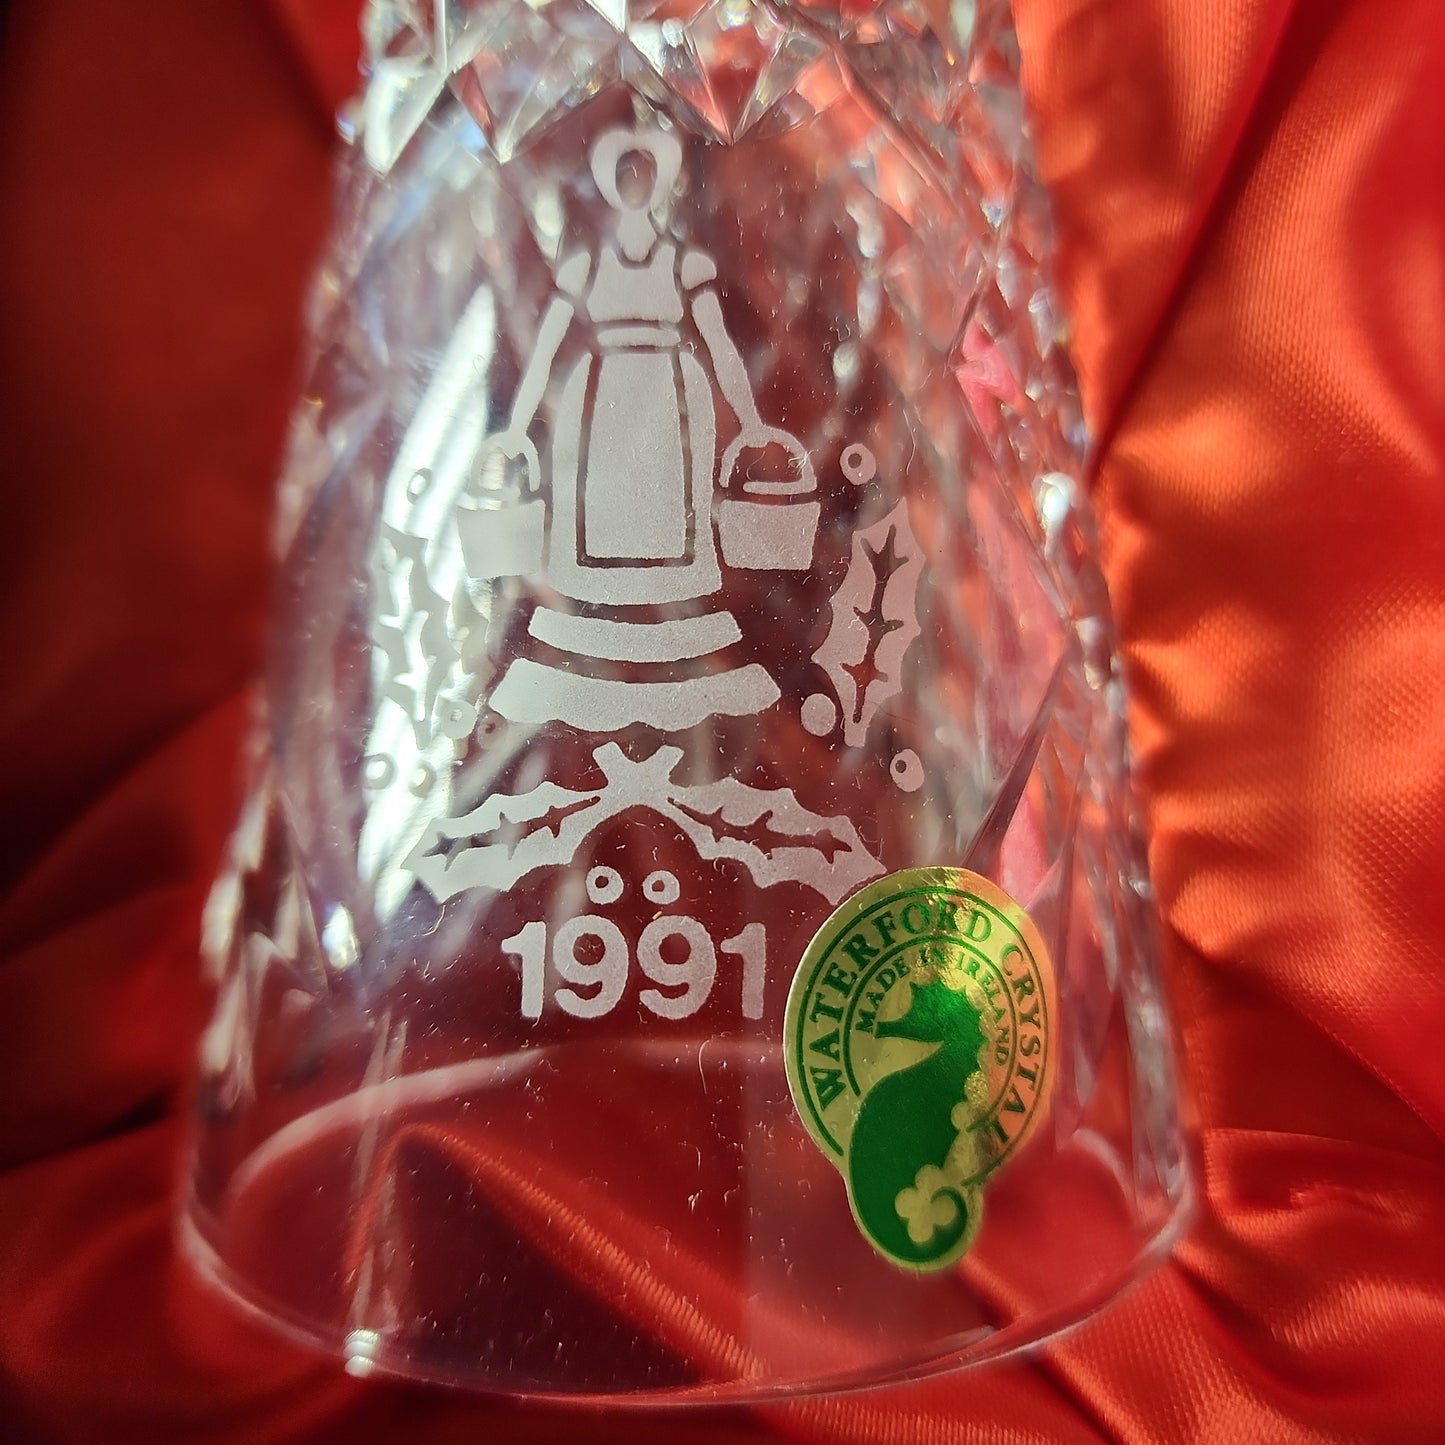 Signed Waterford cut glass 1991 Christmas bell